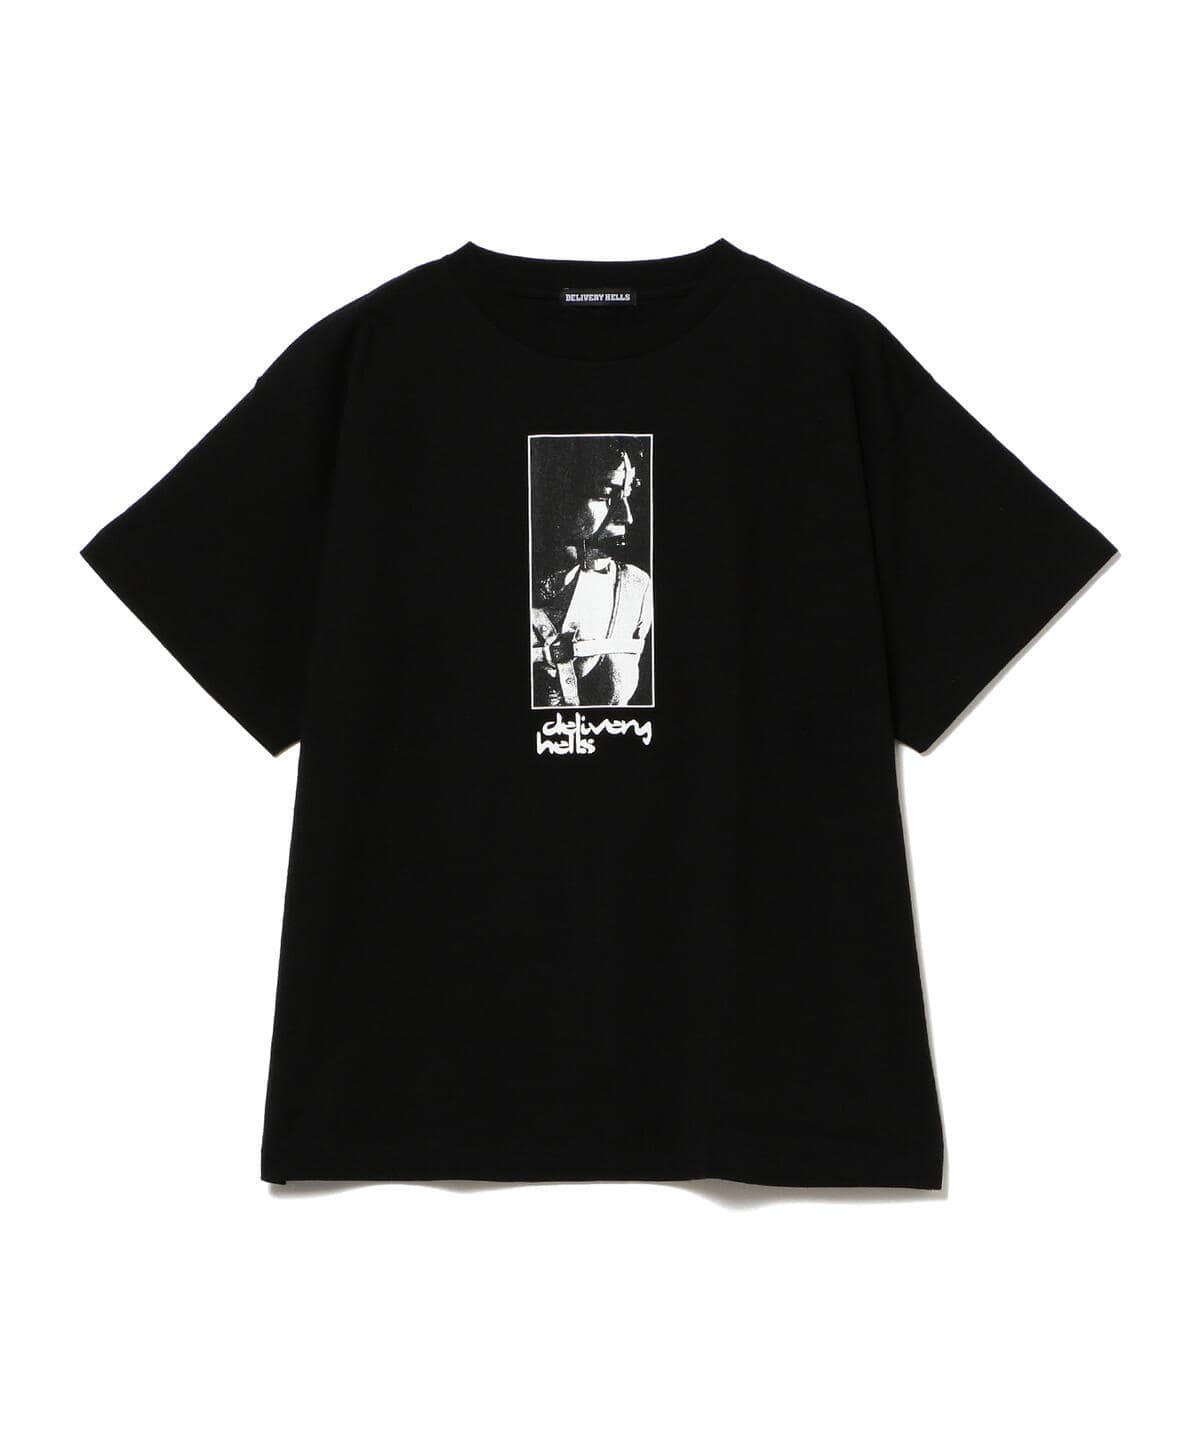 BEAMS T（ビームスT）【アウトレット】Delivery Hells / Play Tシャツ